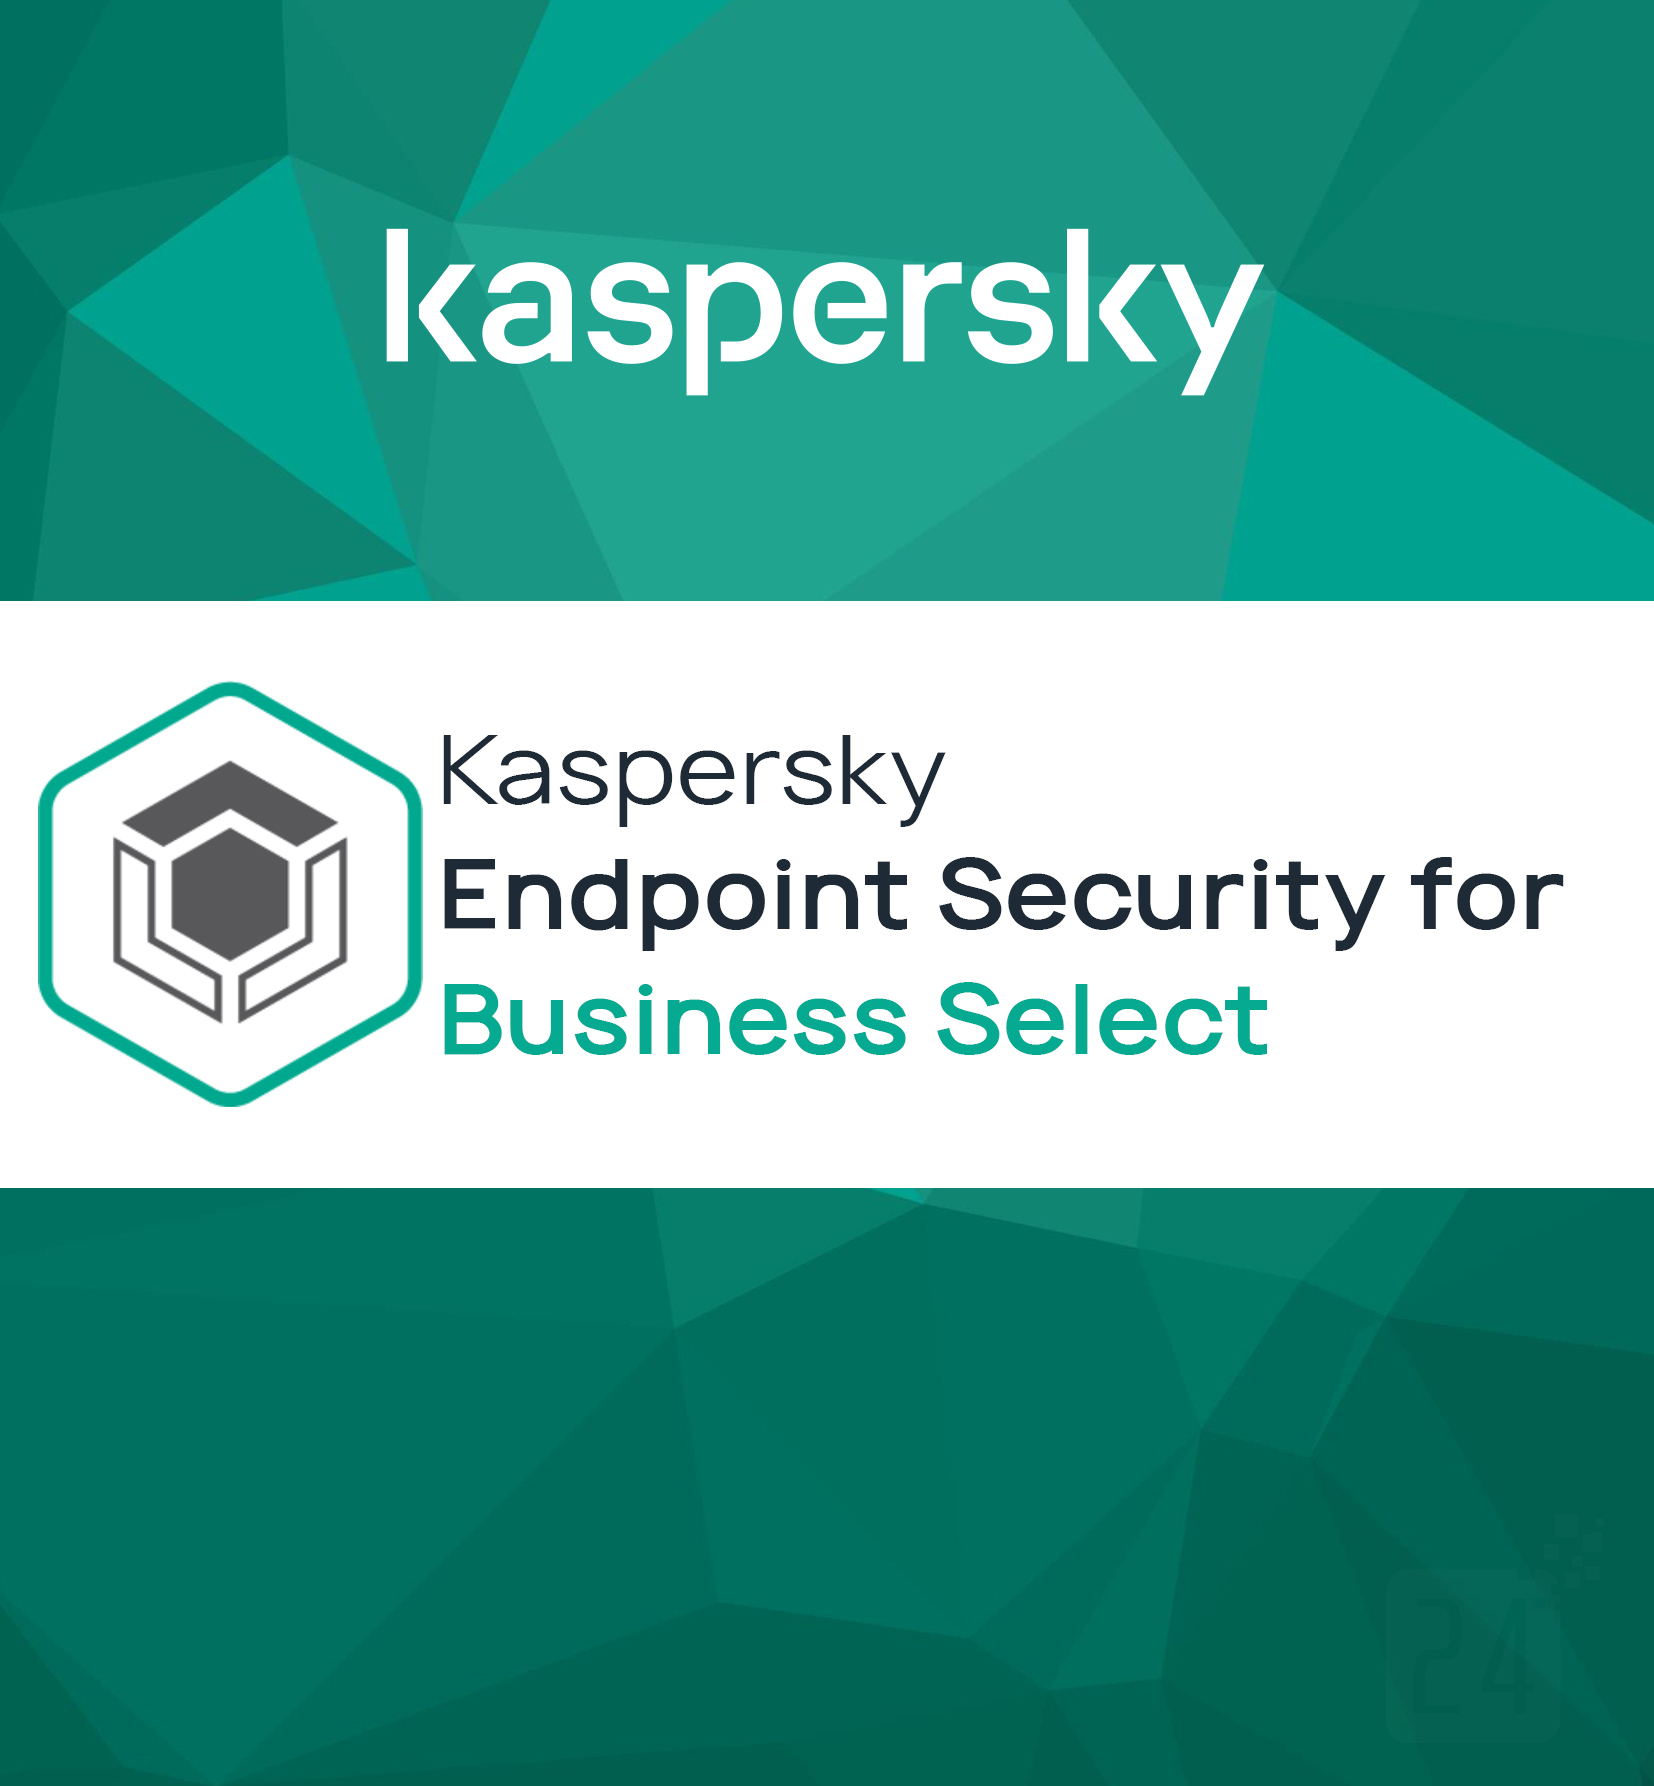 kaspersky-endpoint-security-for-business-select